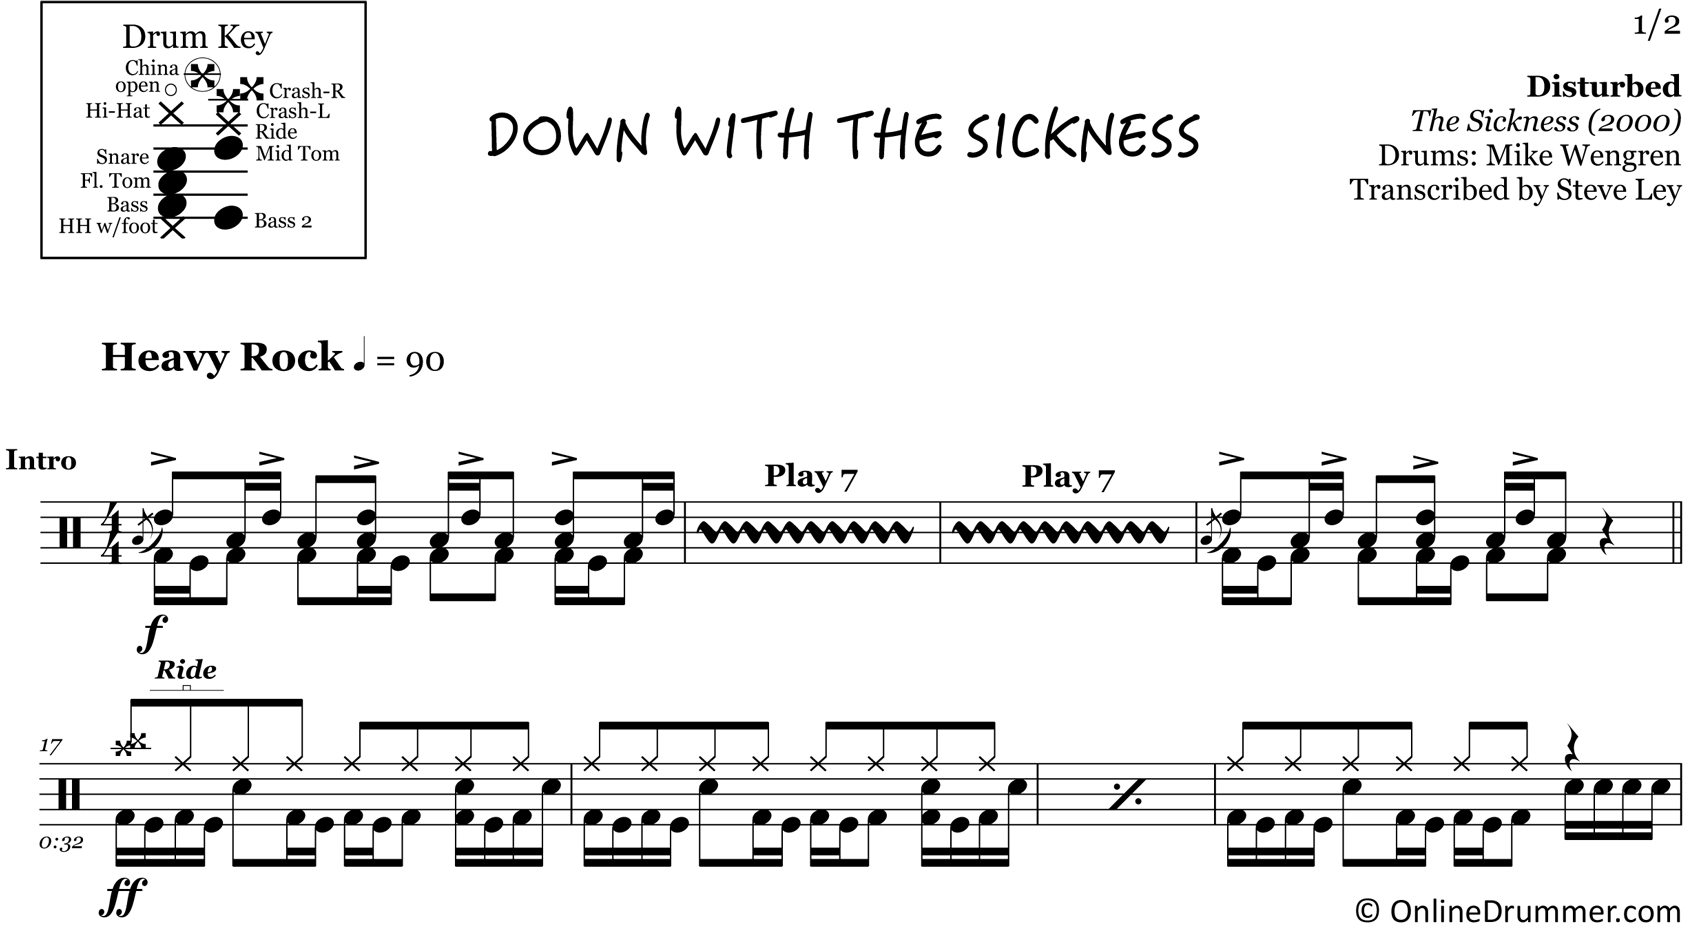 Down with the Sickness - Disturbed - Drum Sheet Music